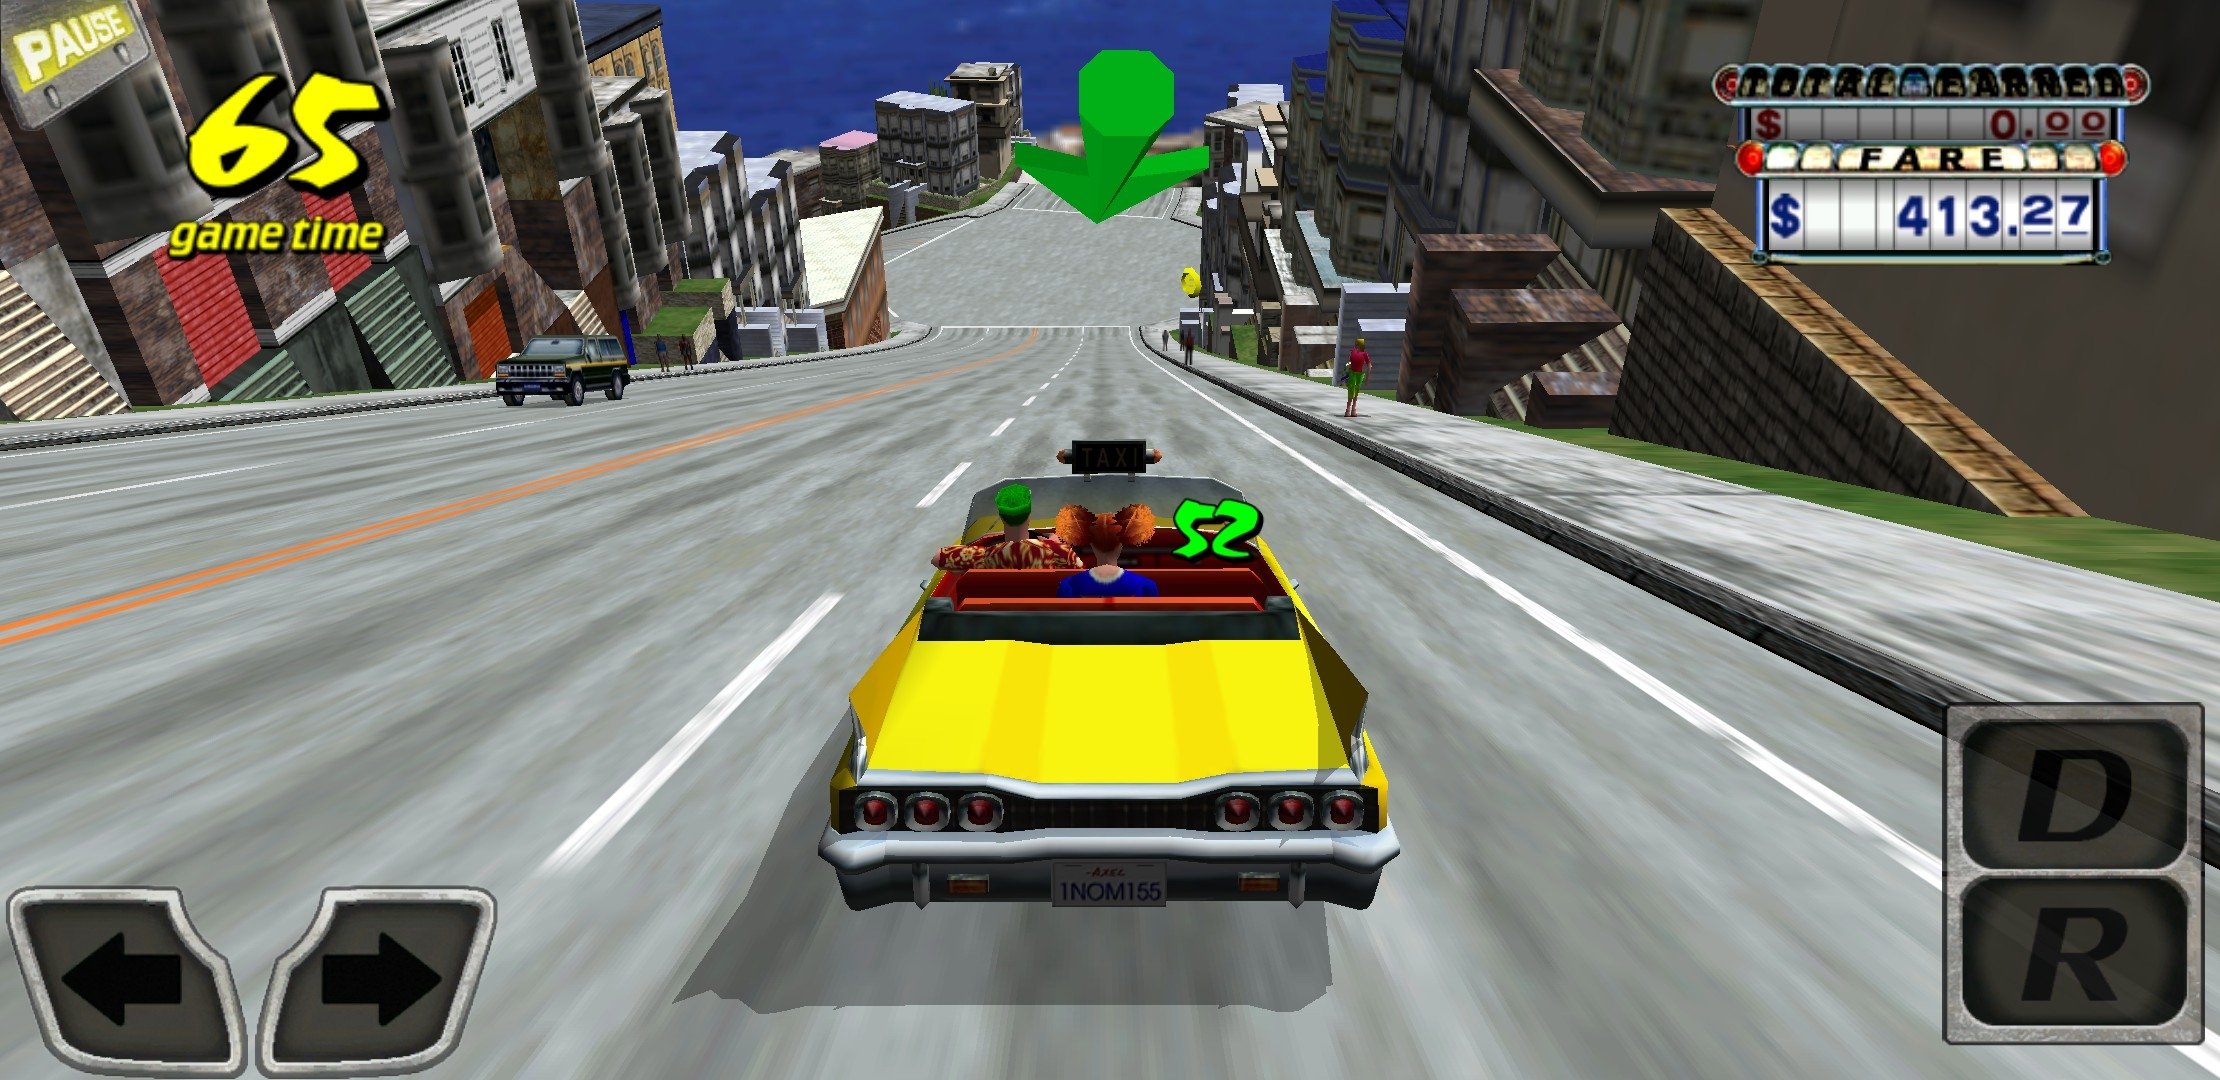 The original 'Crazy Taxi' is free to play on your smartphone